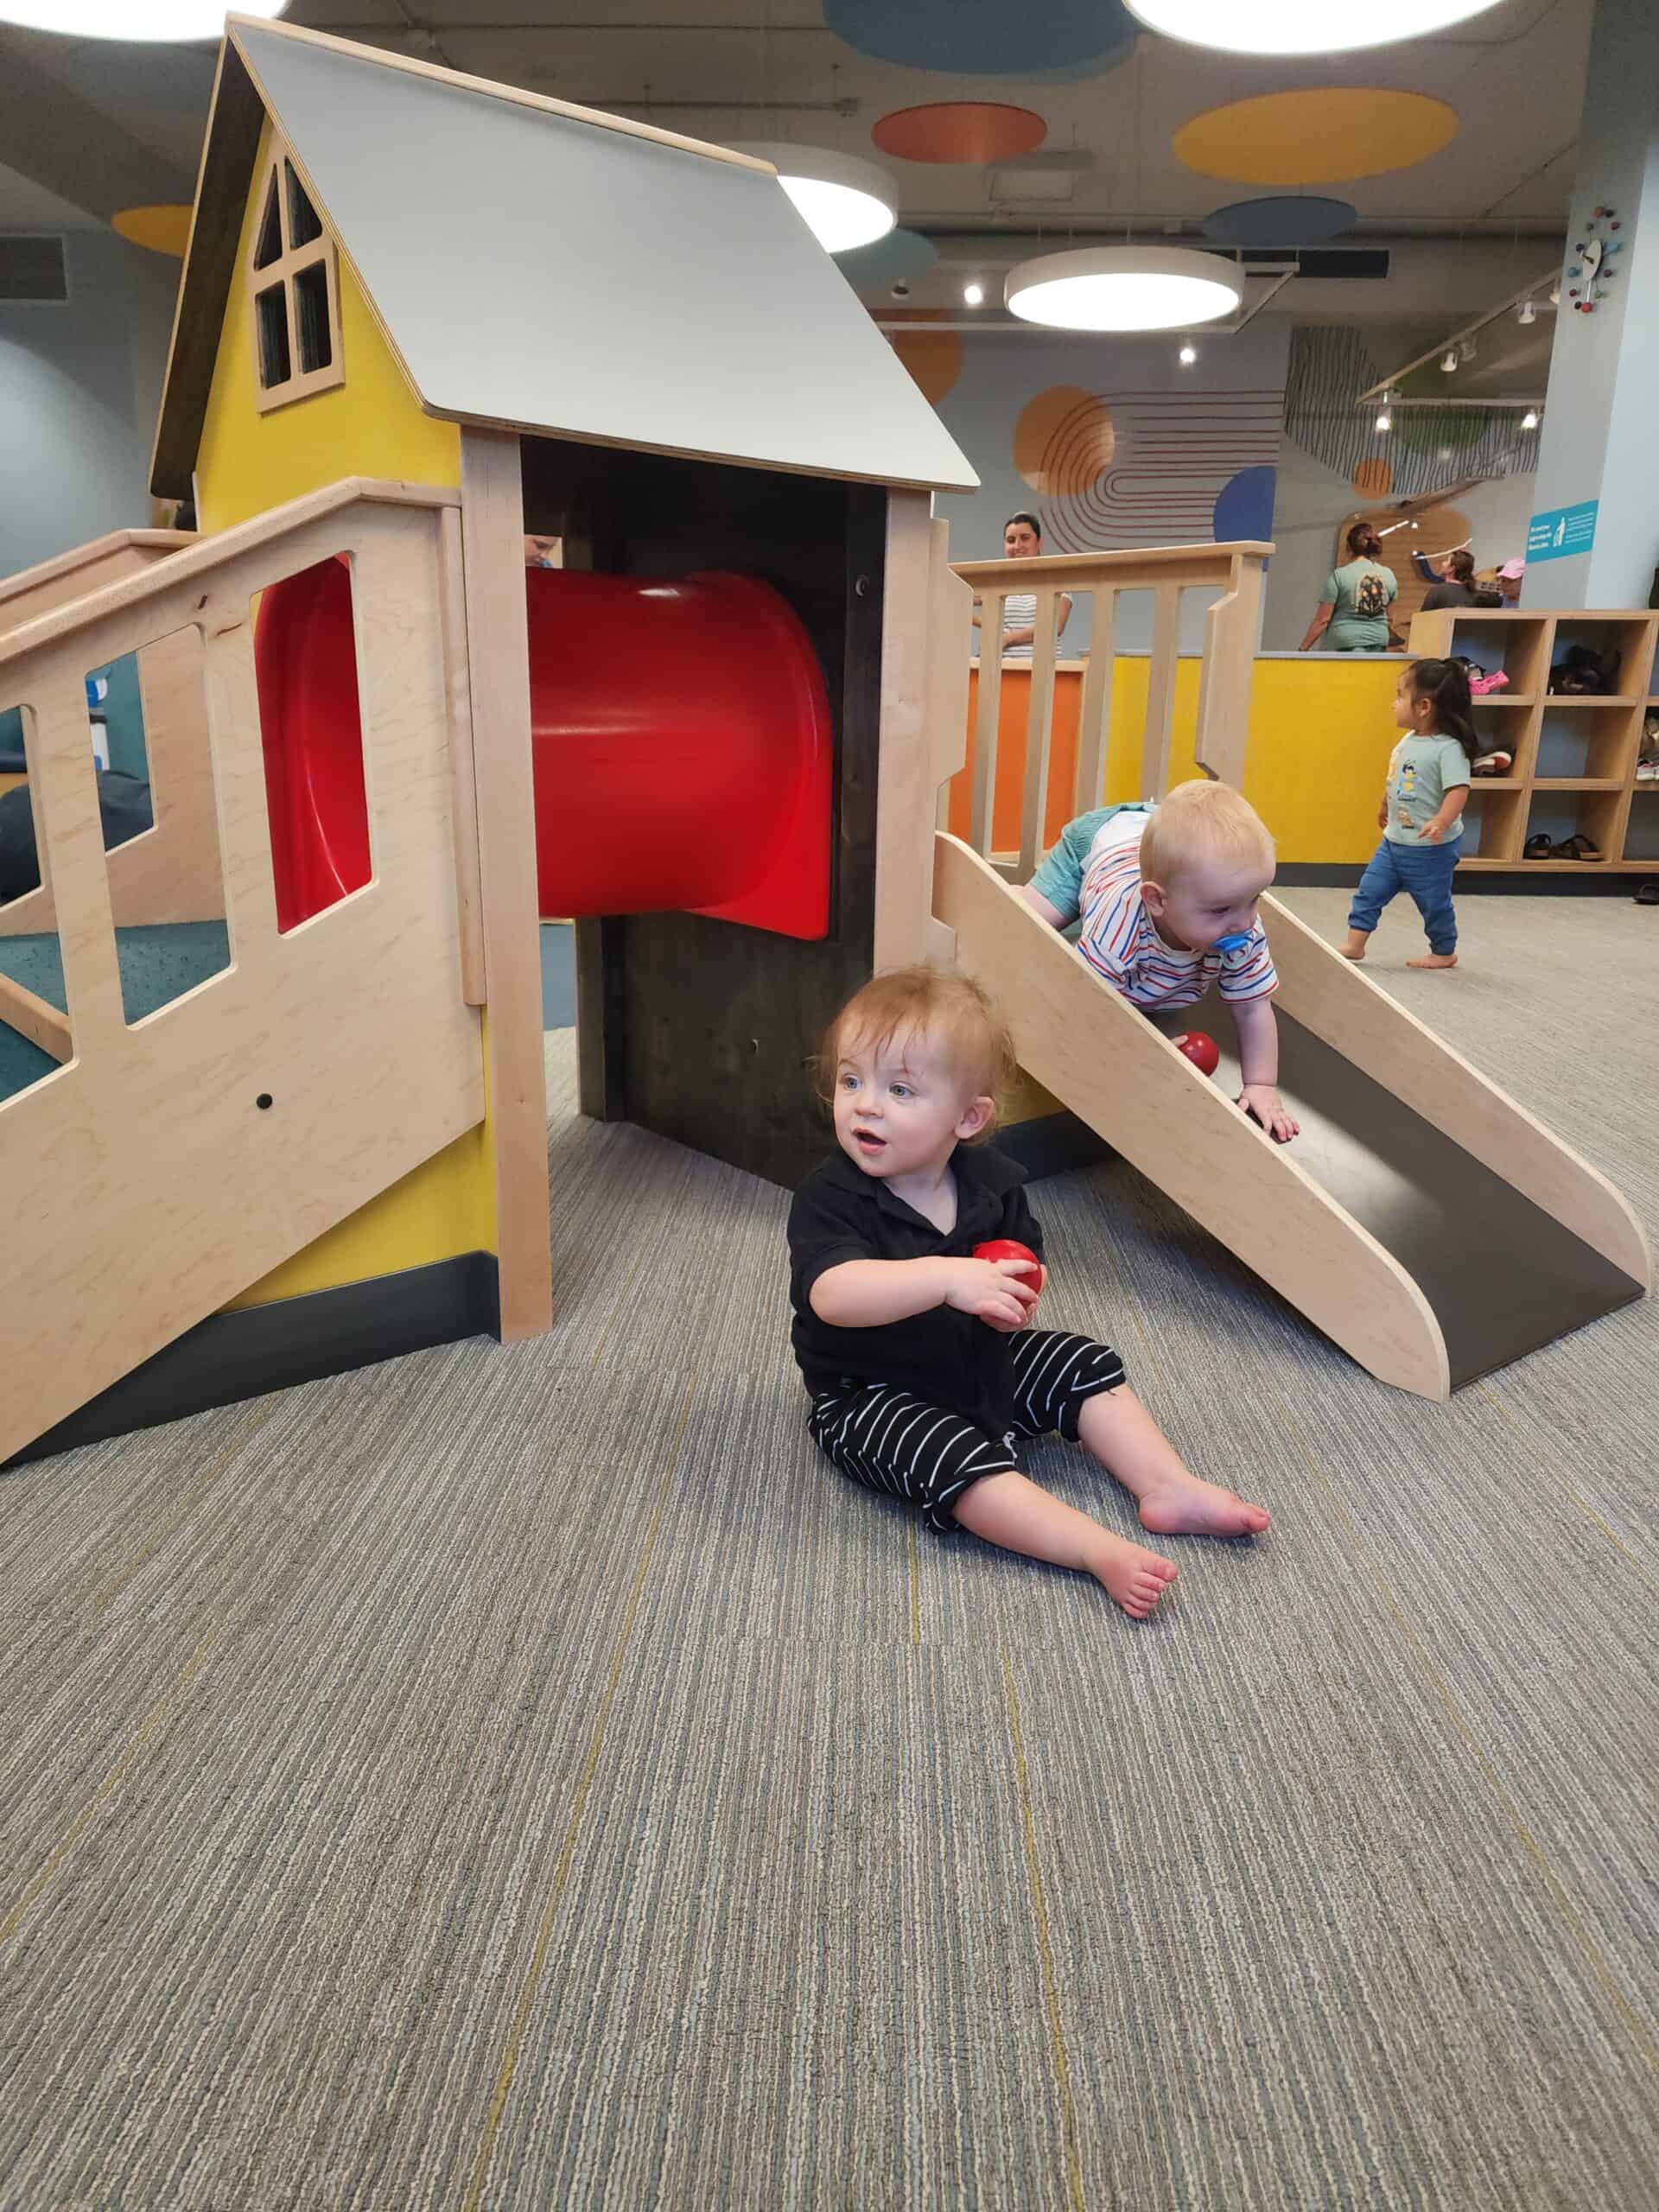 Toddlers enjoy playtime in a cheerful indoor play area, featuring a wooden playhouse with a red slide and a ramp, creating a lively and safe environment for young children to explore and interact